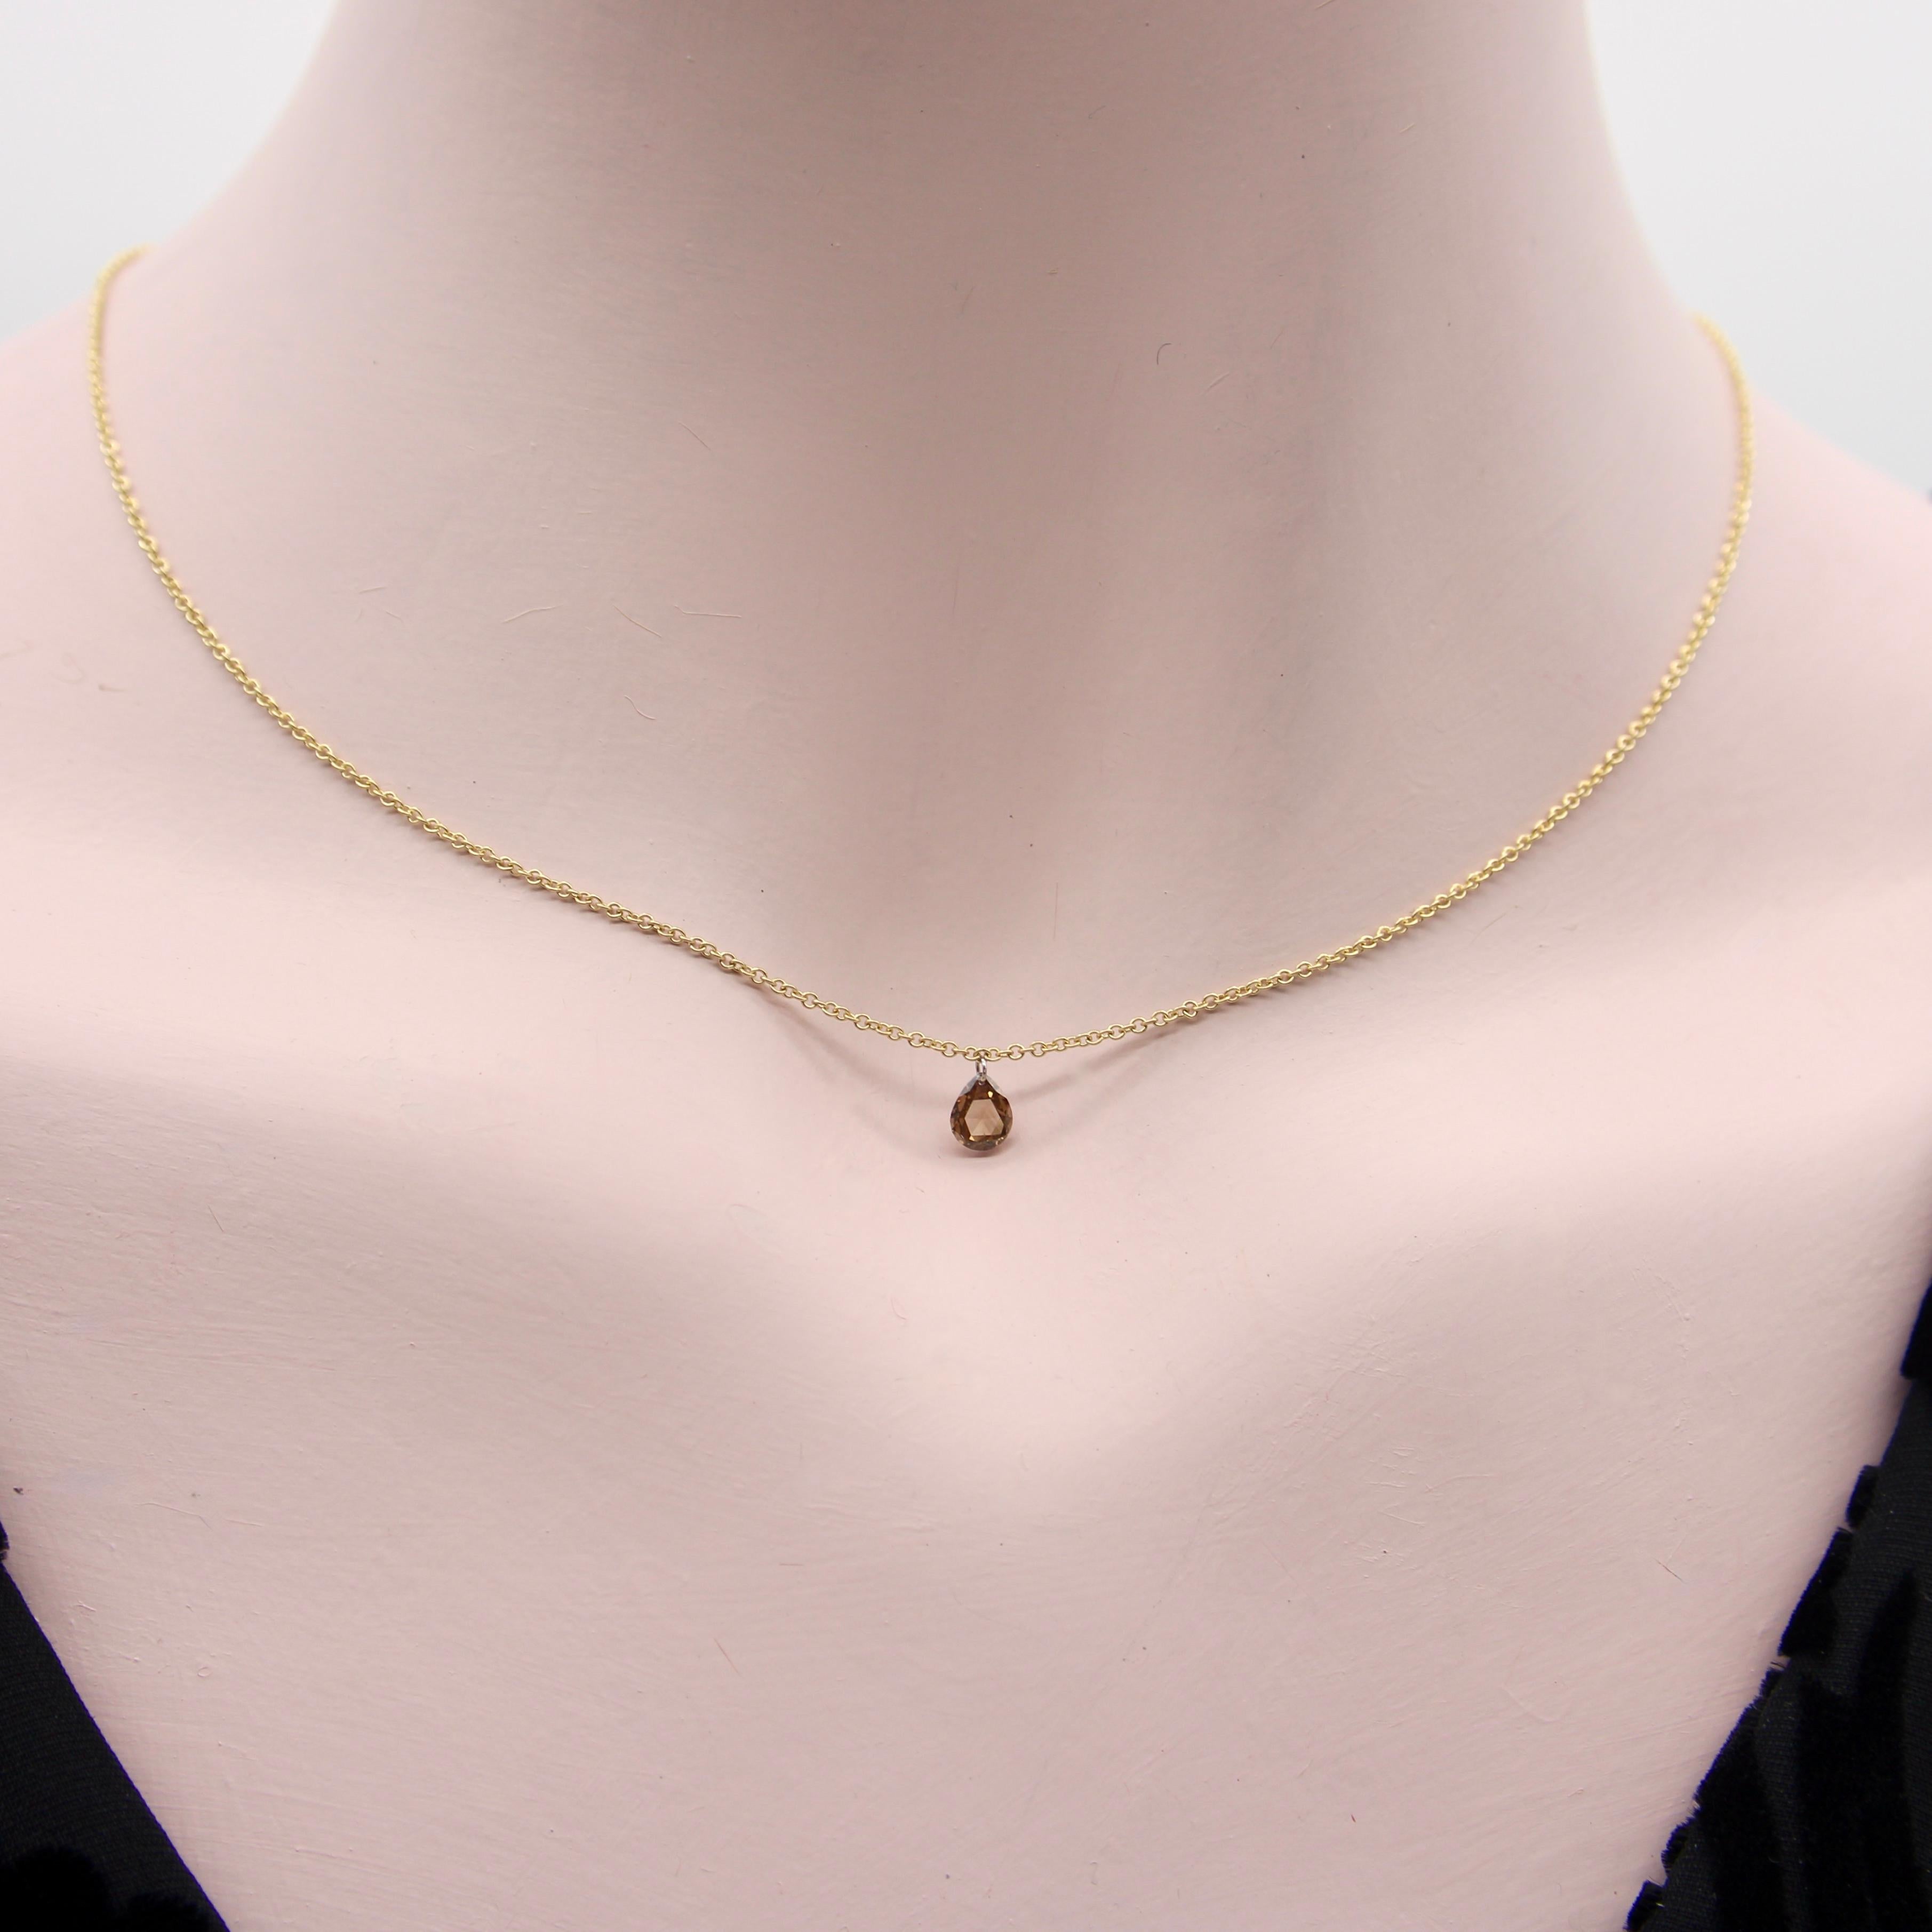 Pear Shaped Dangling Chocolate Rose Cut Diamond on 18K Gold Chain  For Sale 2